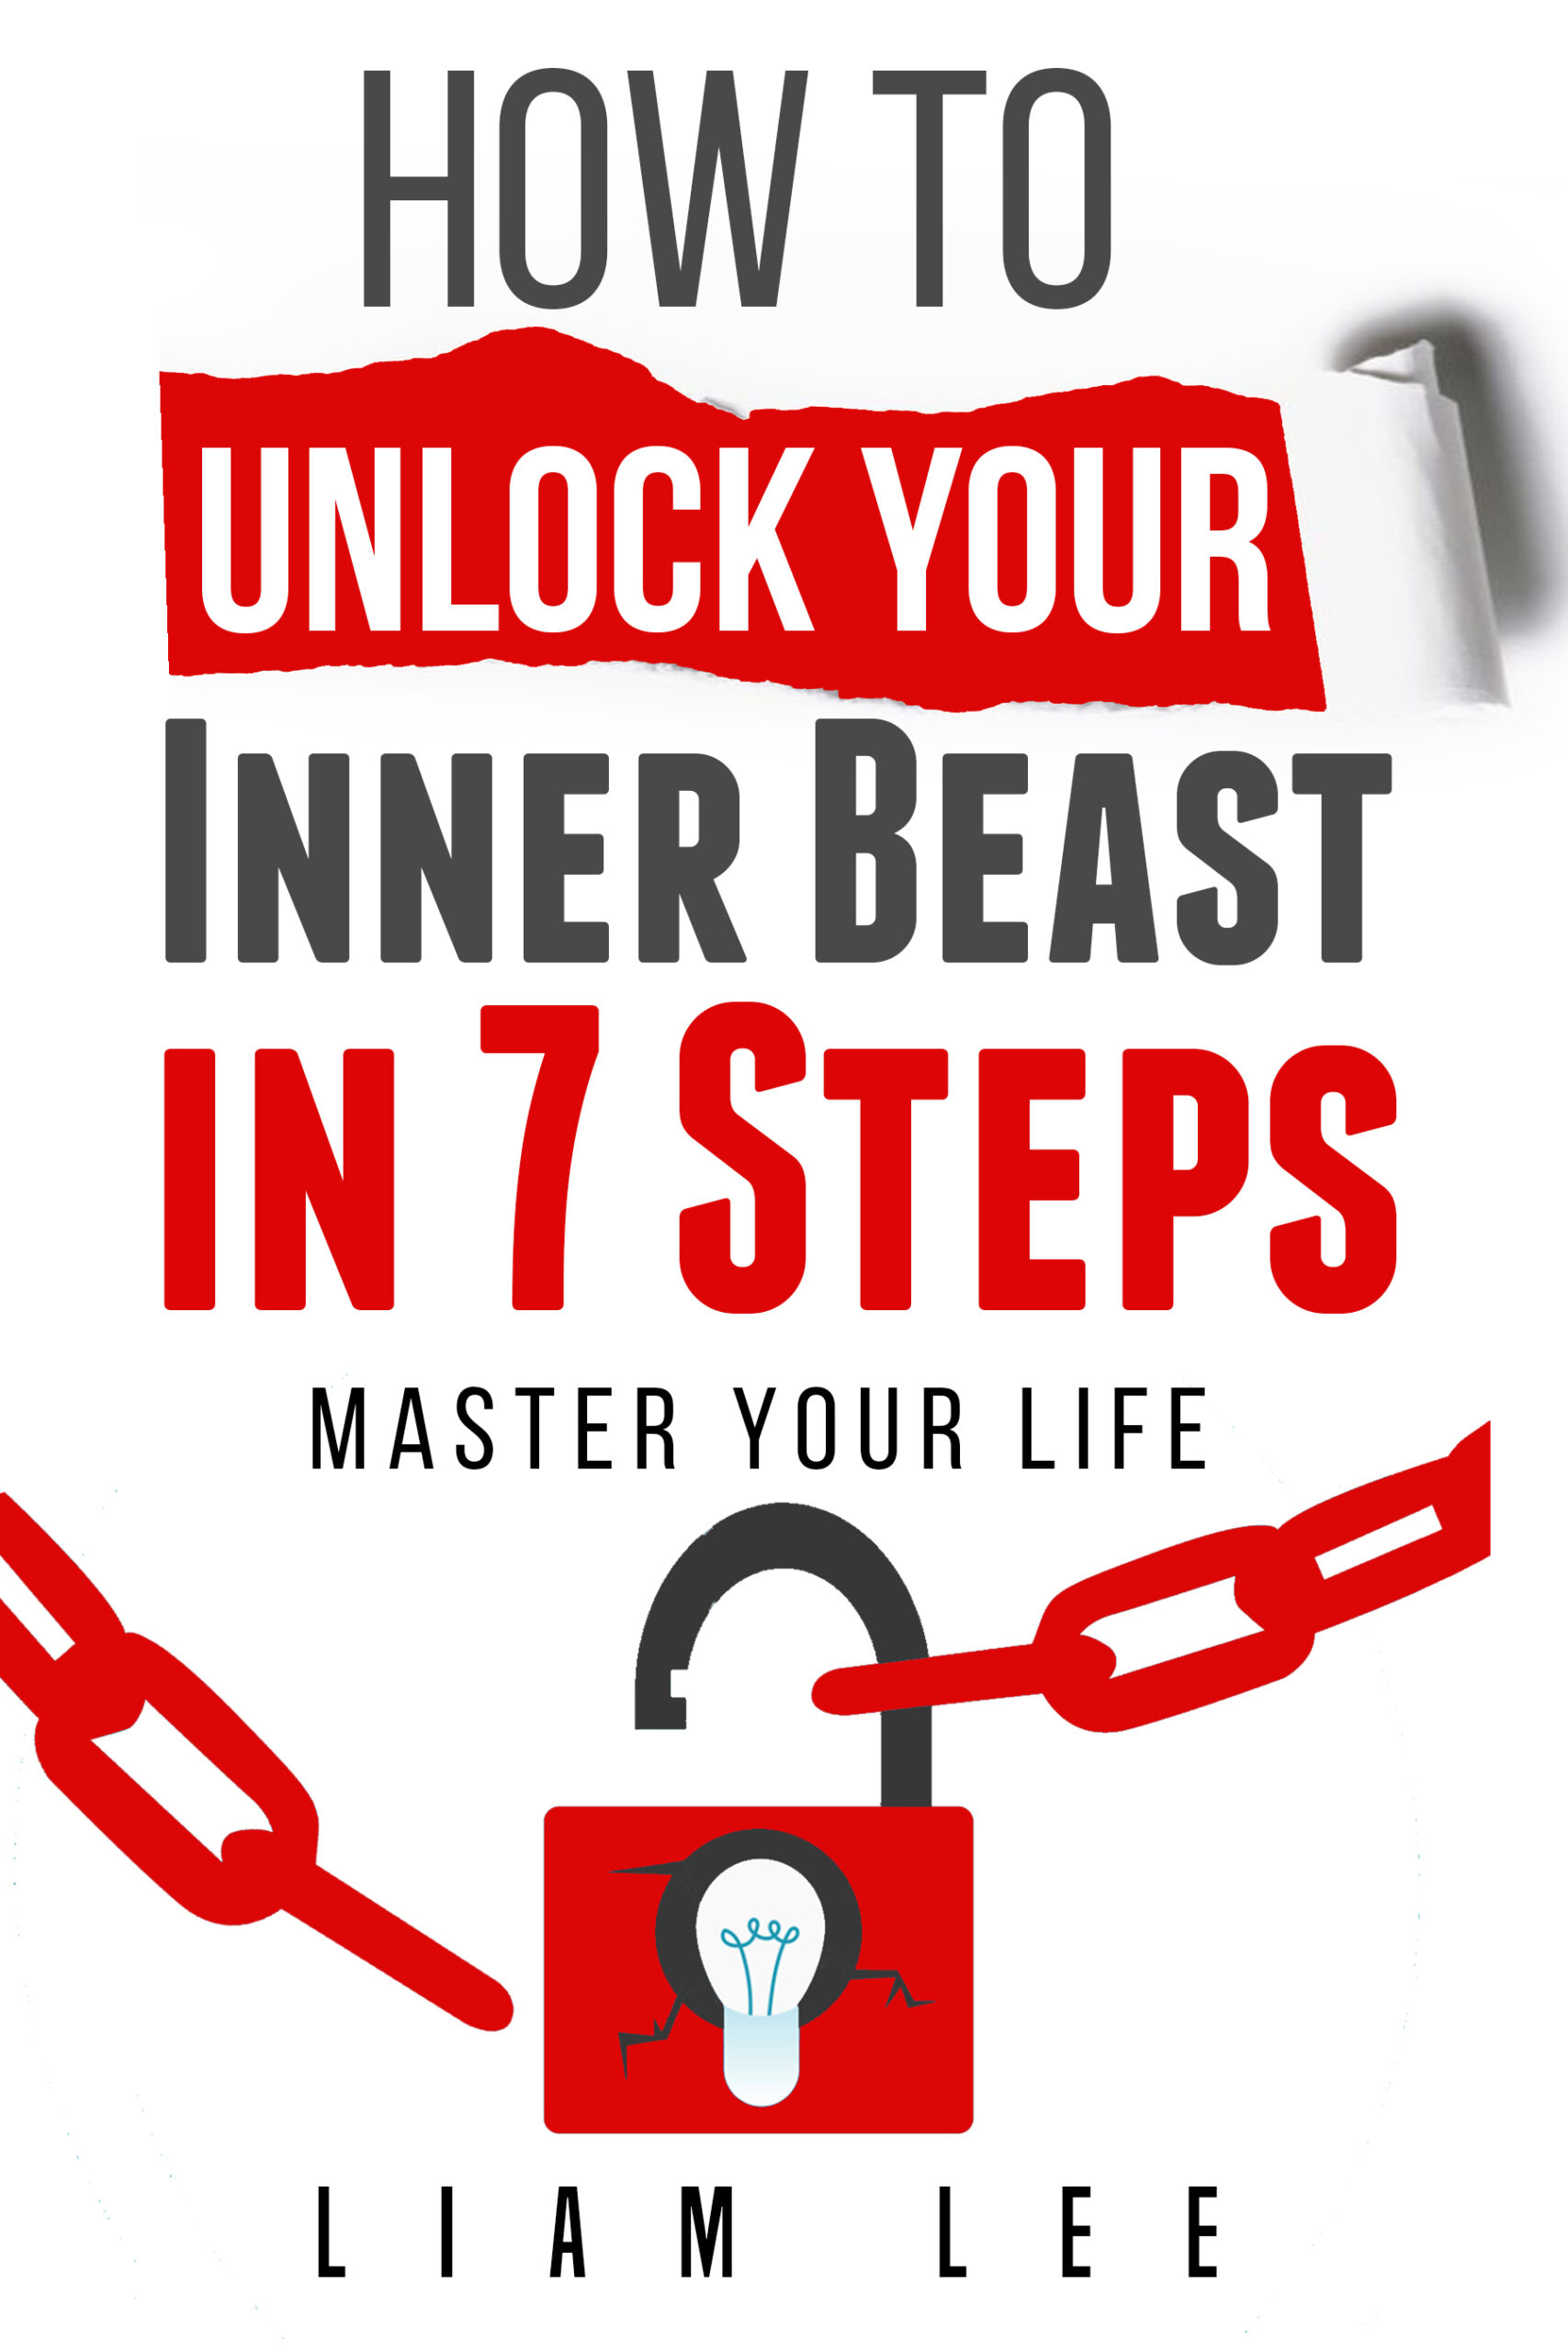 FREE: How To Unlock Your Inner Beast In 7 Steps: Master Your Life by Liam Lee